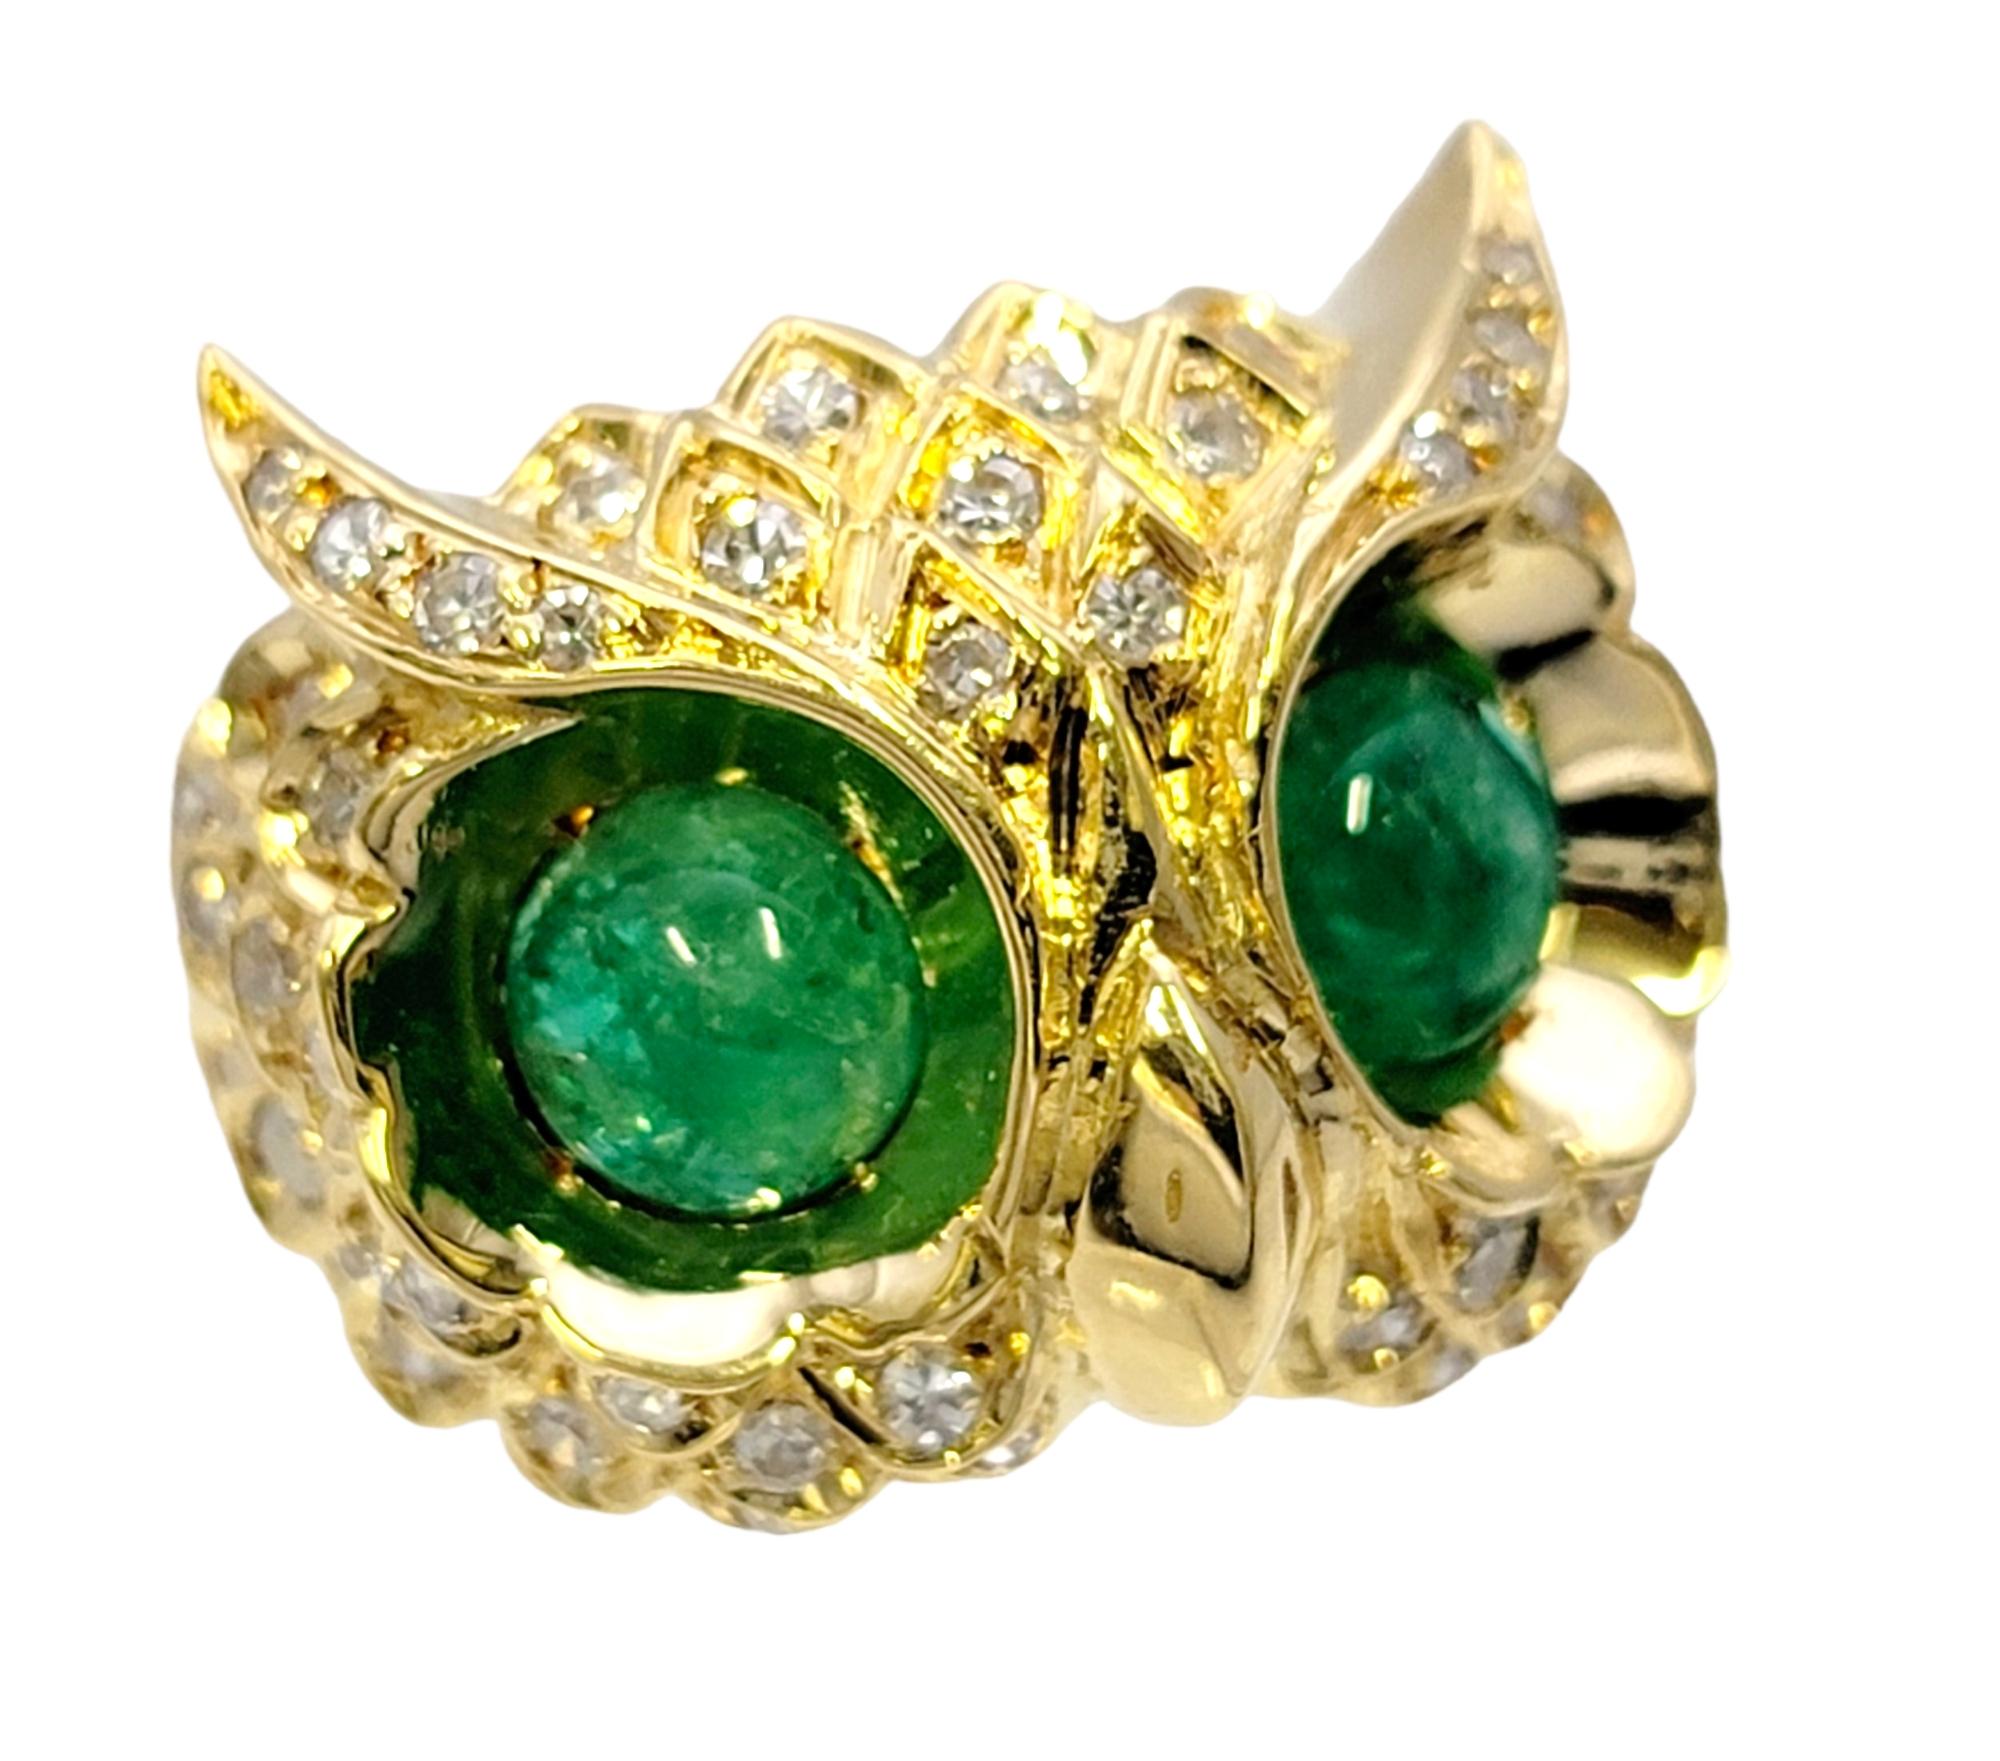 Ring size: 4.5

Calling all bird lovers! Featured here is a wonderfully detailed diamond and emerald owl band ring. This charming piece is filled with character from every angle with its gorgeous gemstones and intricate detail work. A fabulous